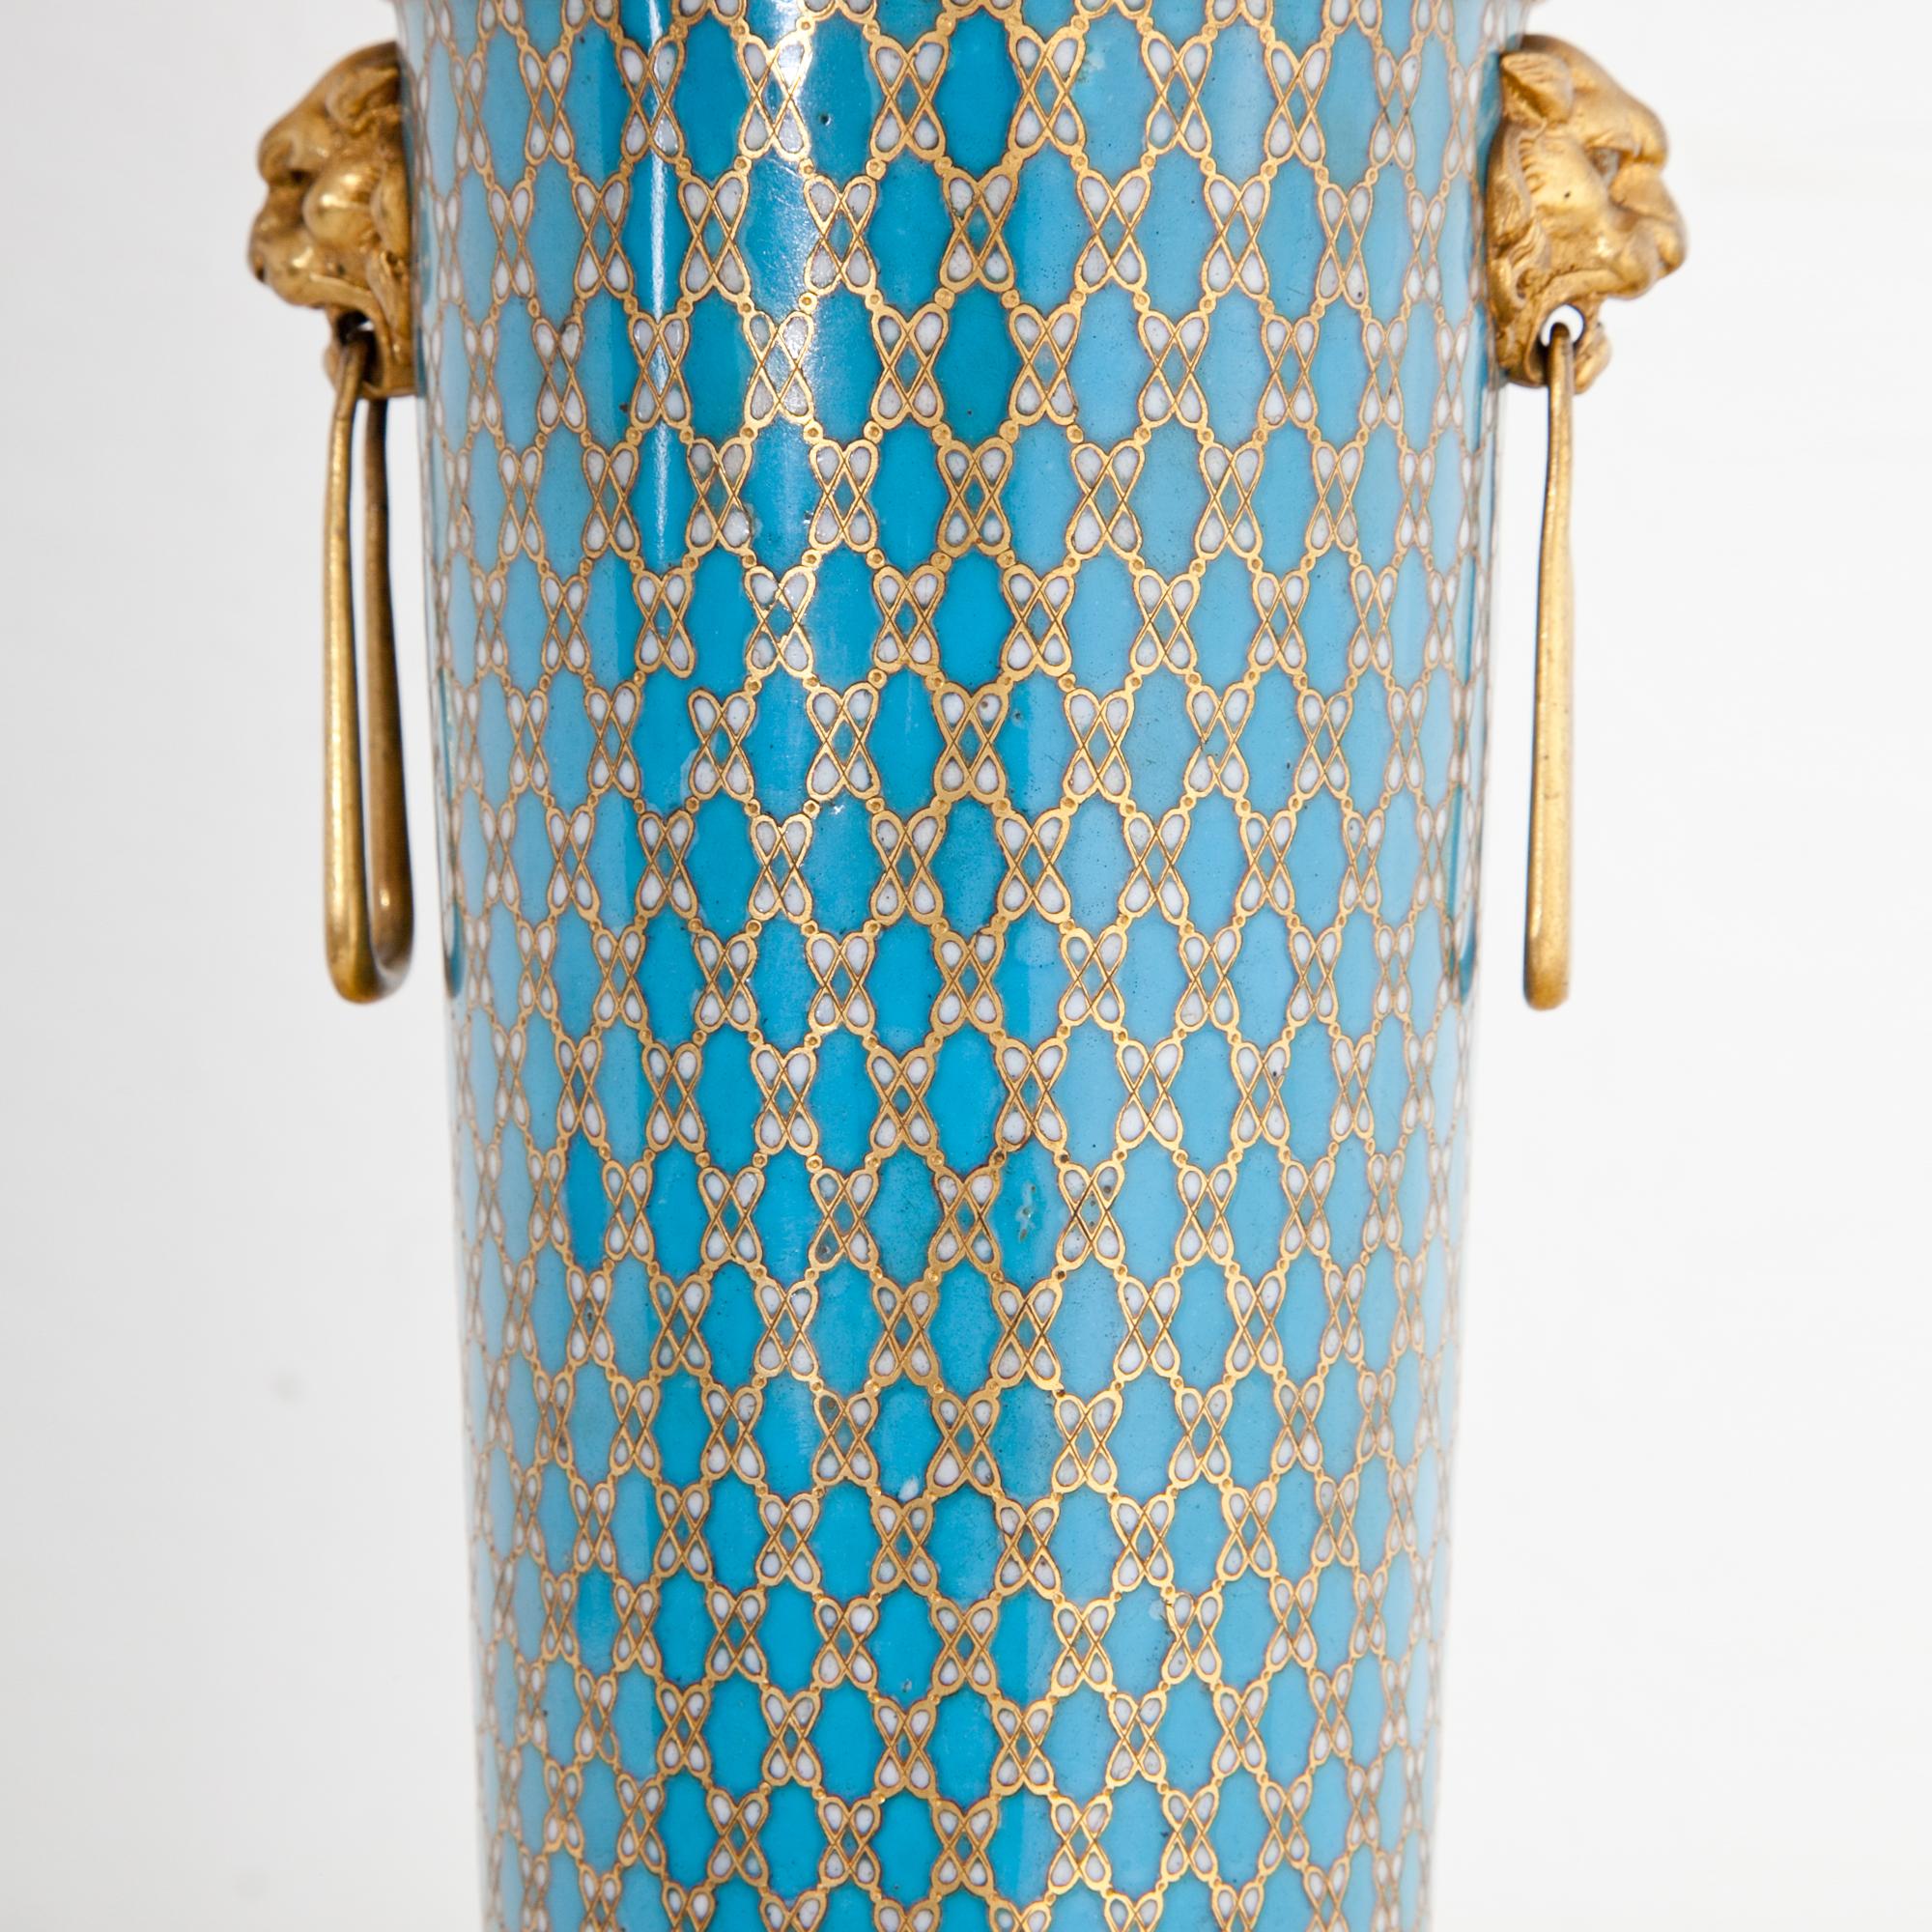 Cloisonné Vase, Signed Barbedienne, France, Second Half of the 19th Century 1